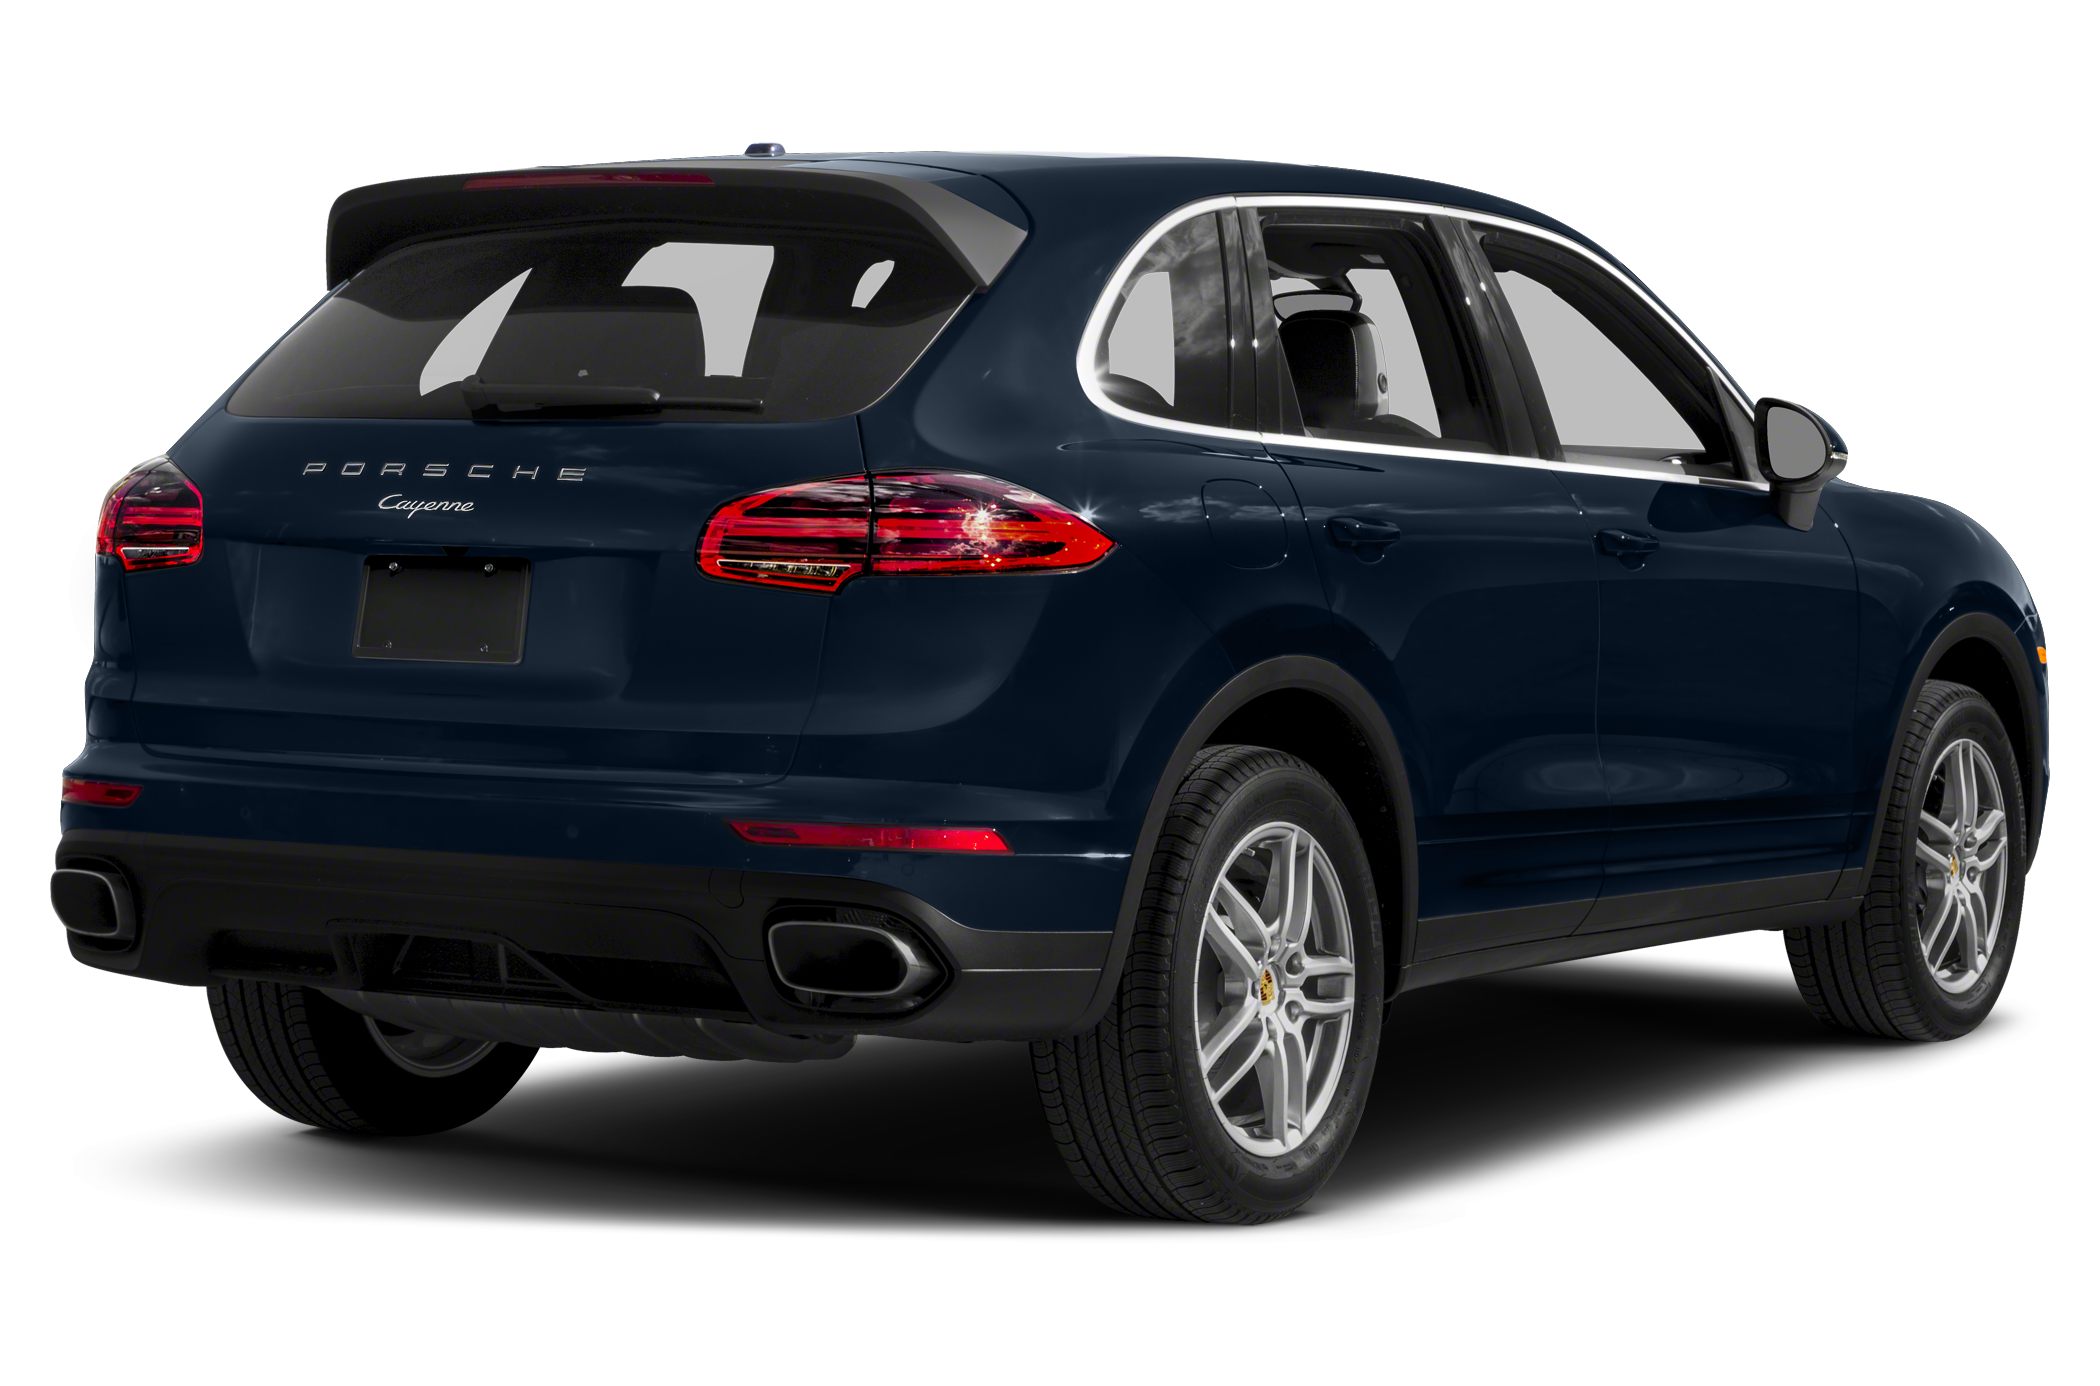 16 Porsche Cayenne Owner Reviews And Ratings